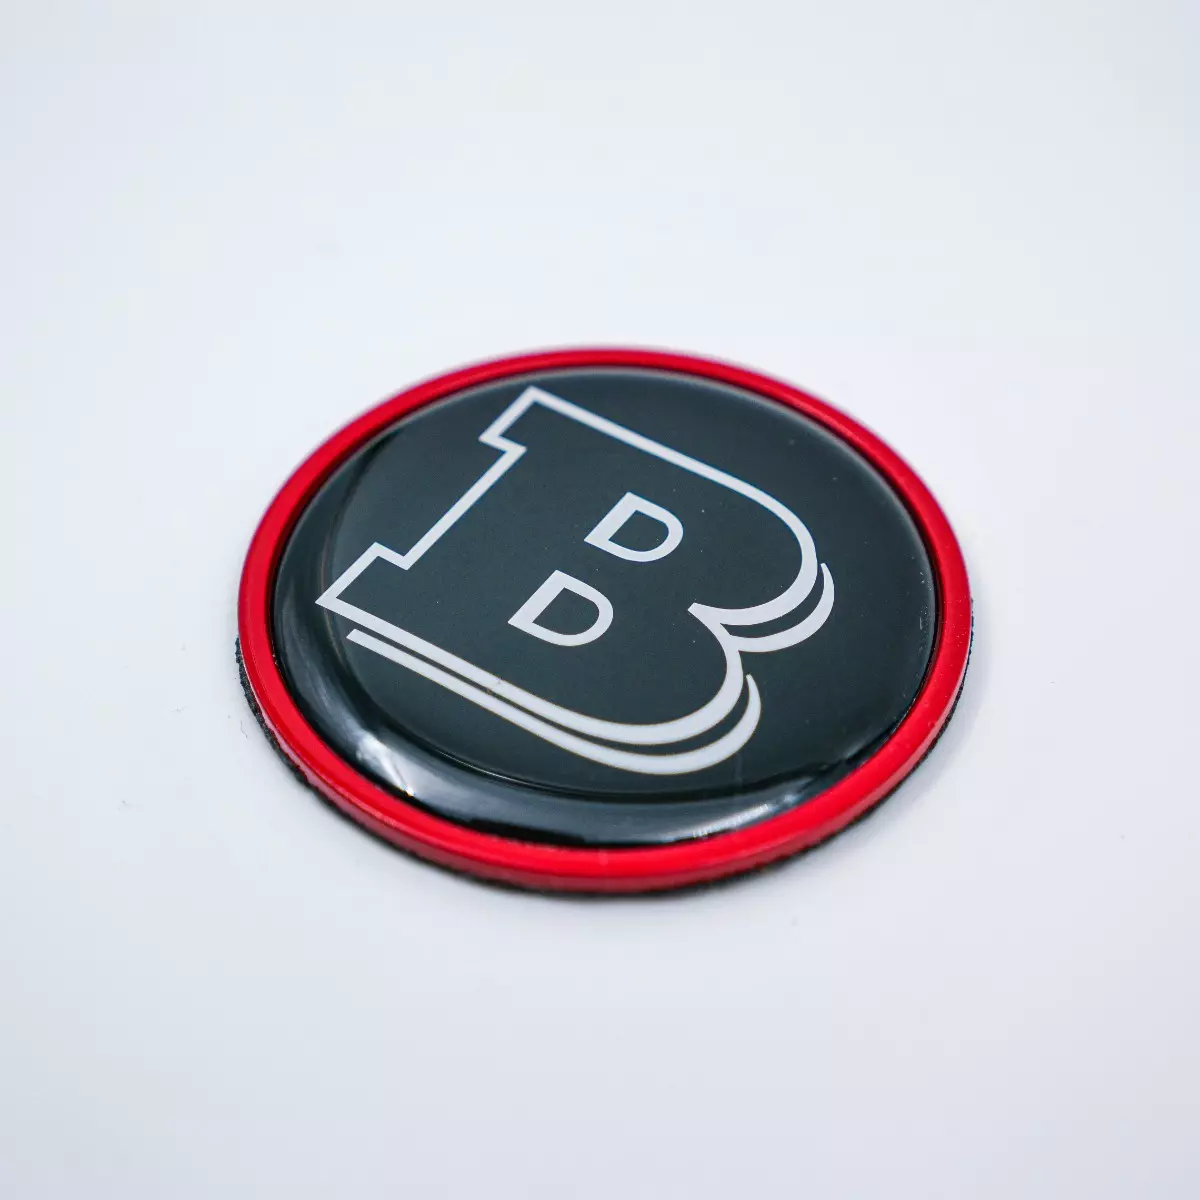 Brabus Hood Badge 55 mm Red with Black and Gray Logo for Hood Cover W463 W463A G-Class Mercedes-Benz